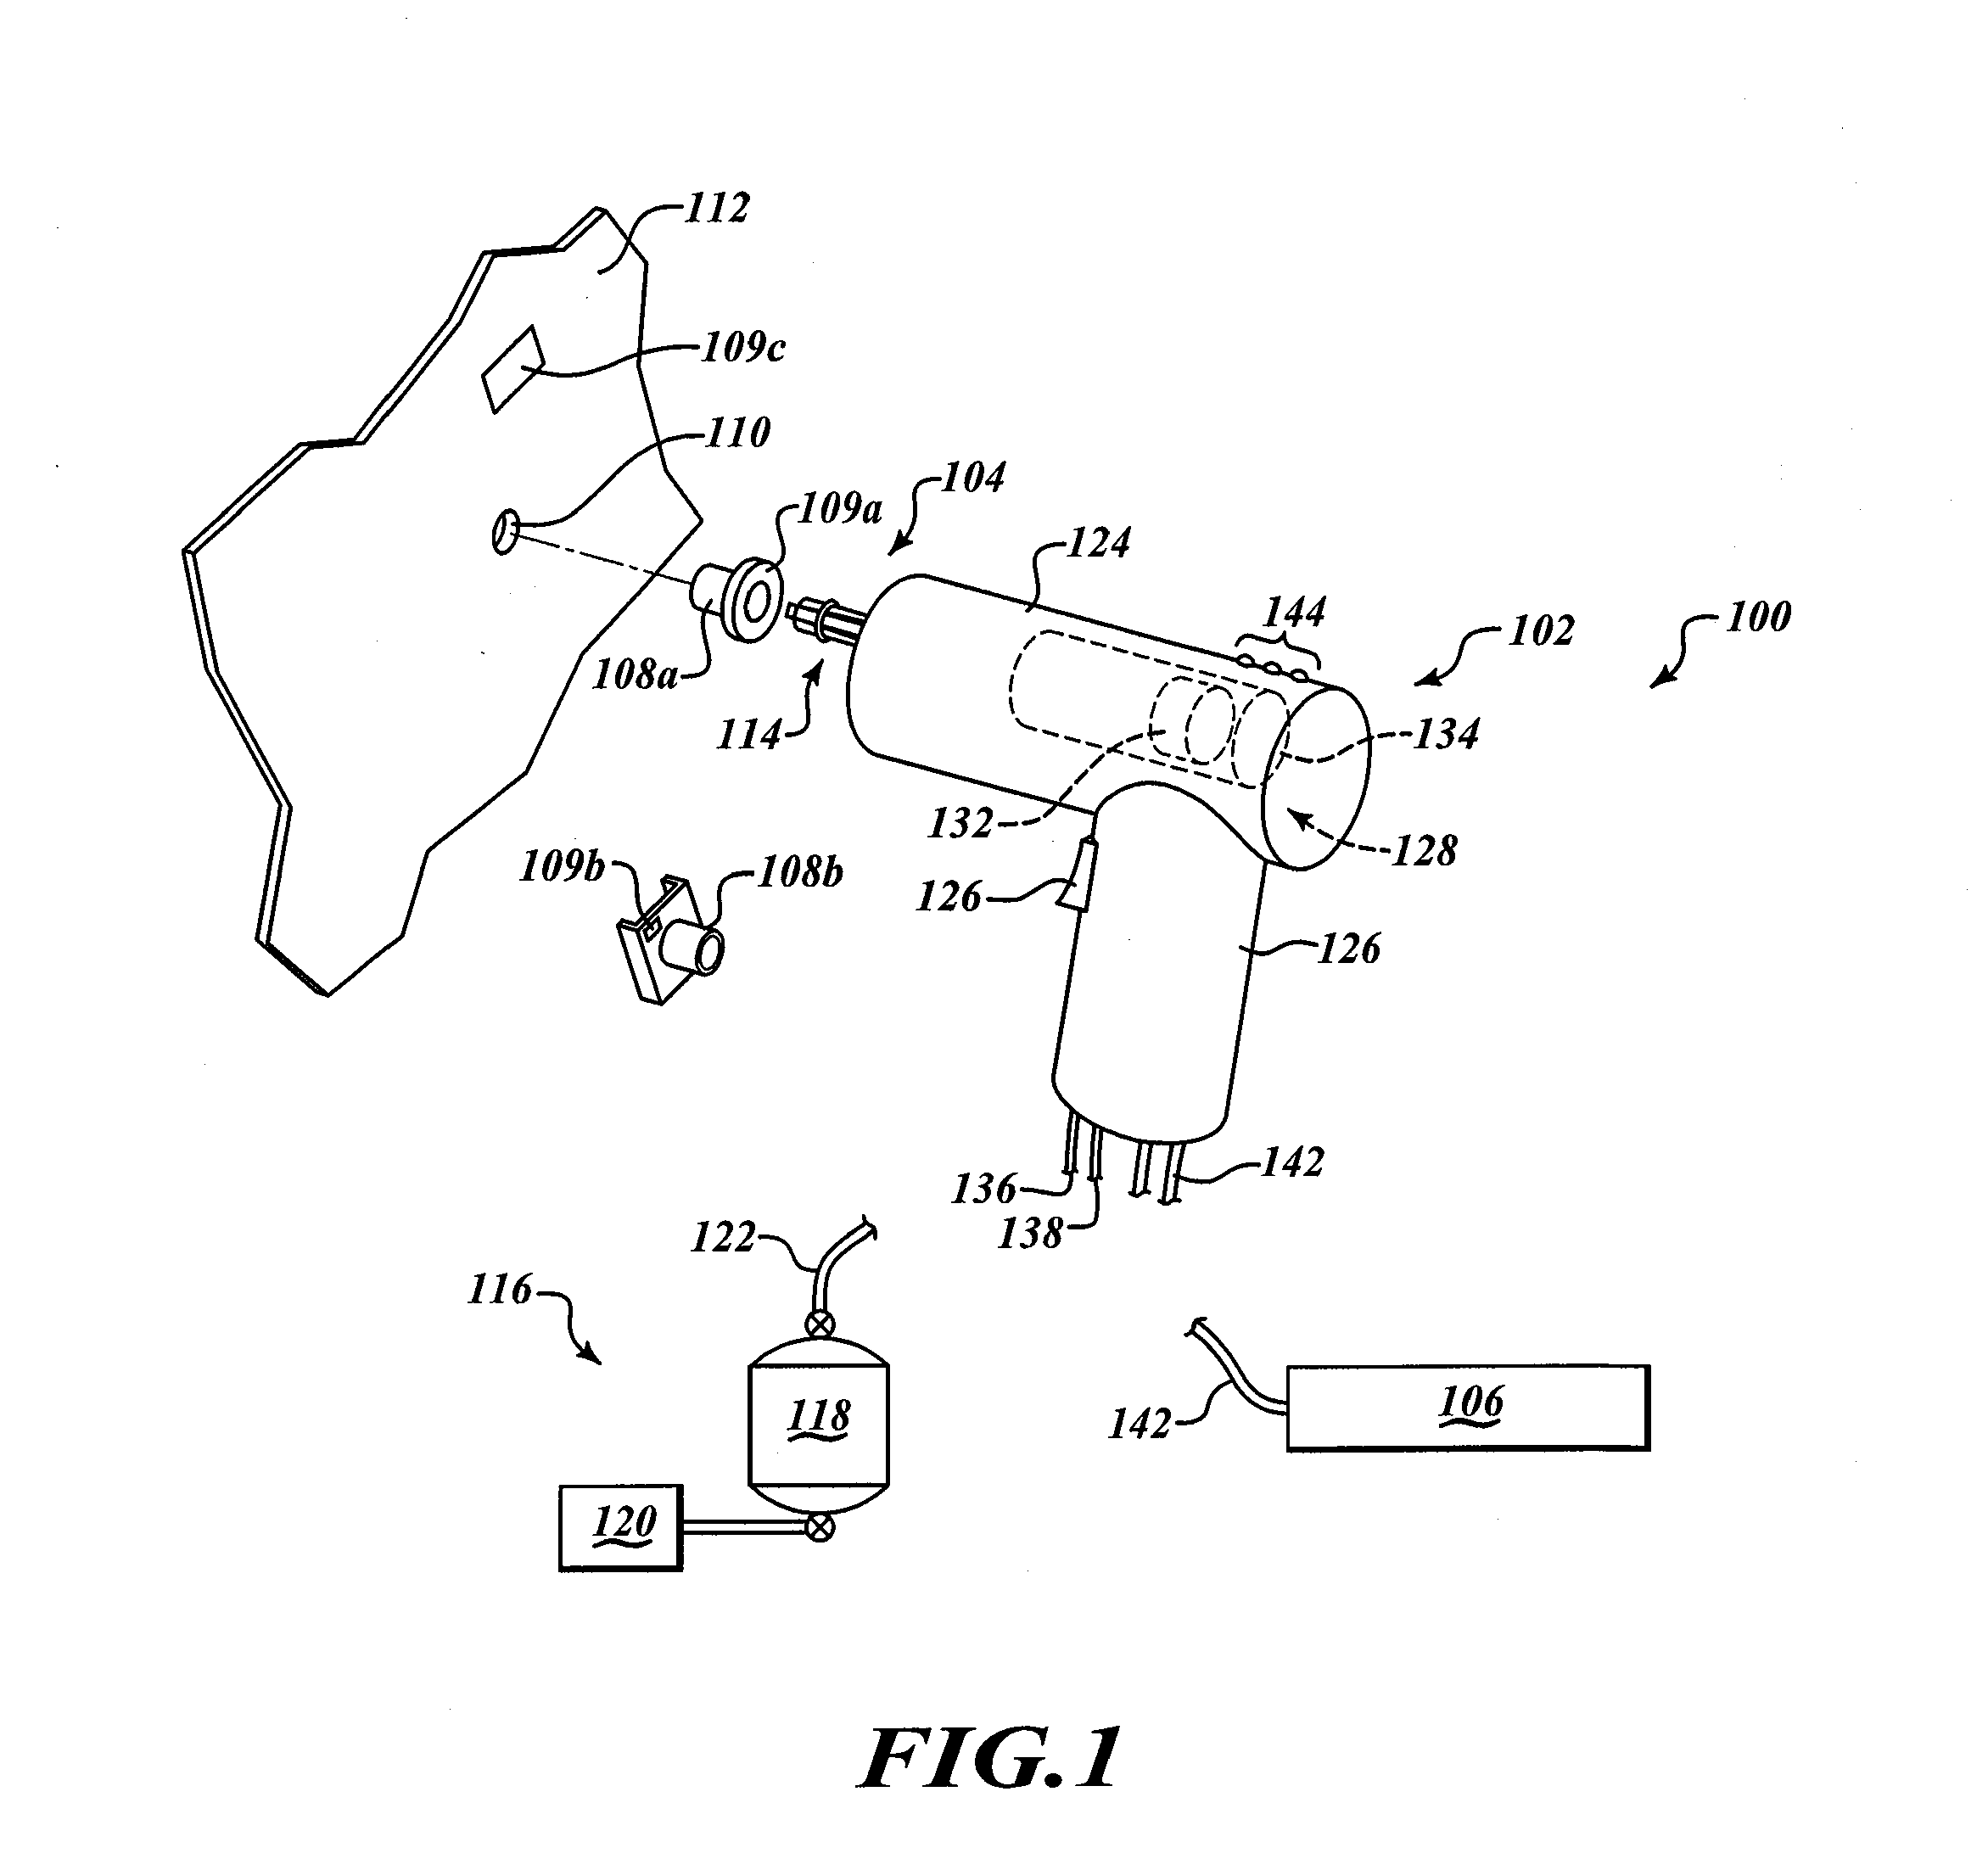 Smart installation/processing systems, components, and methods of operating the same